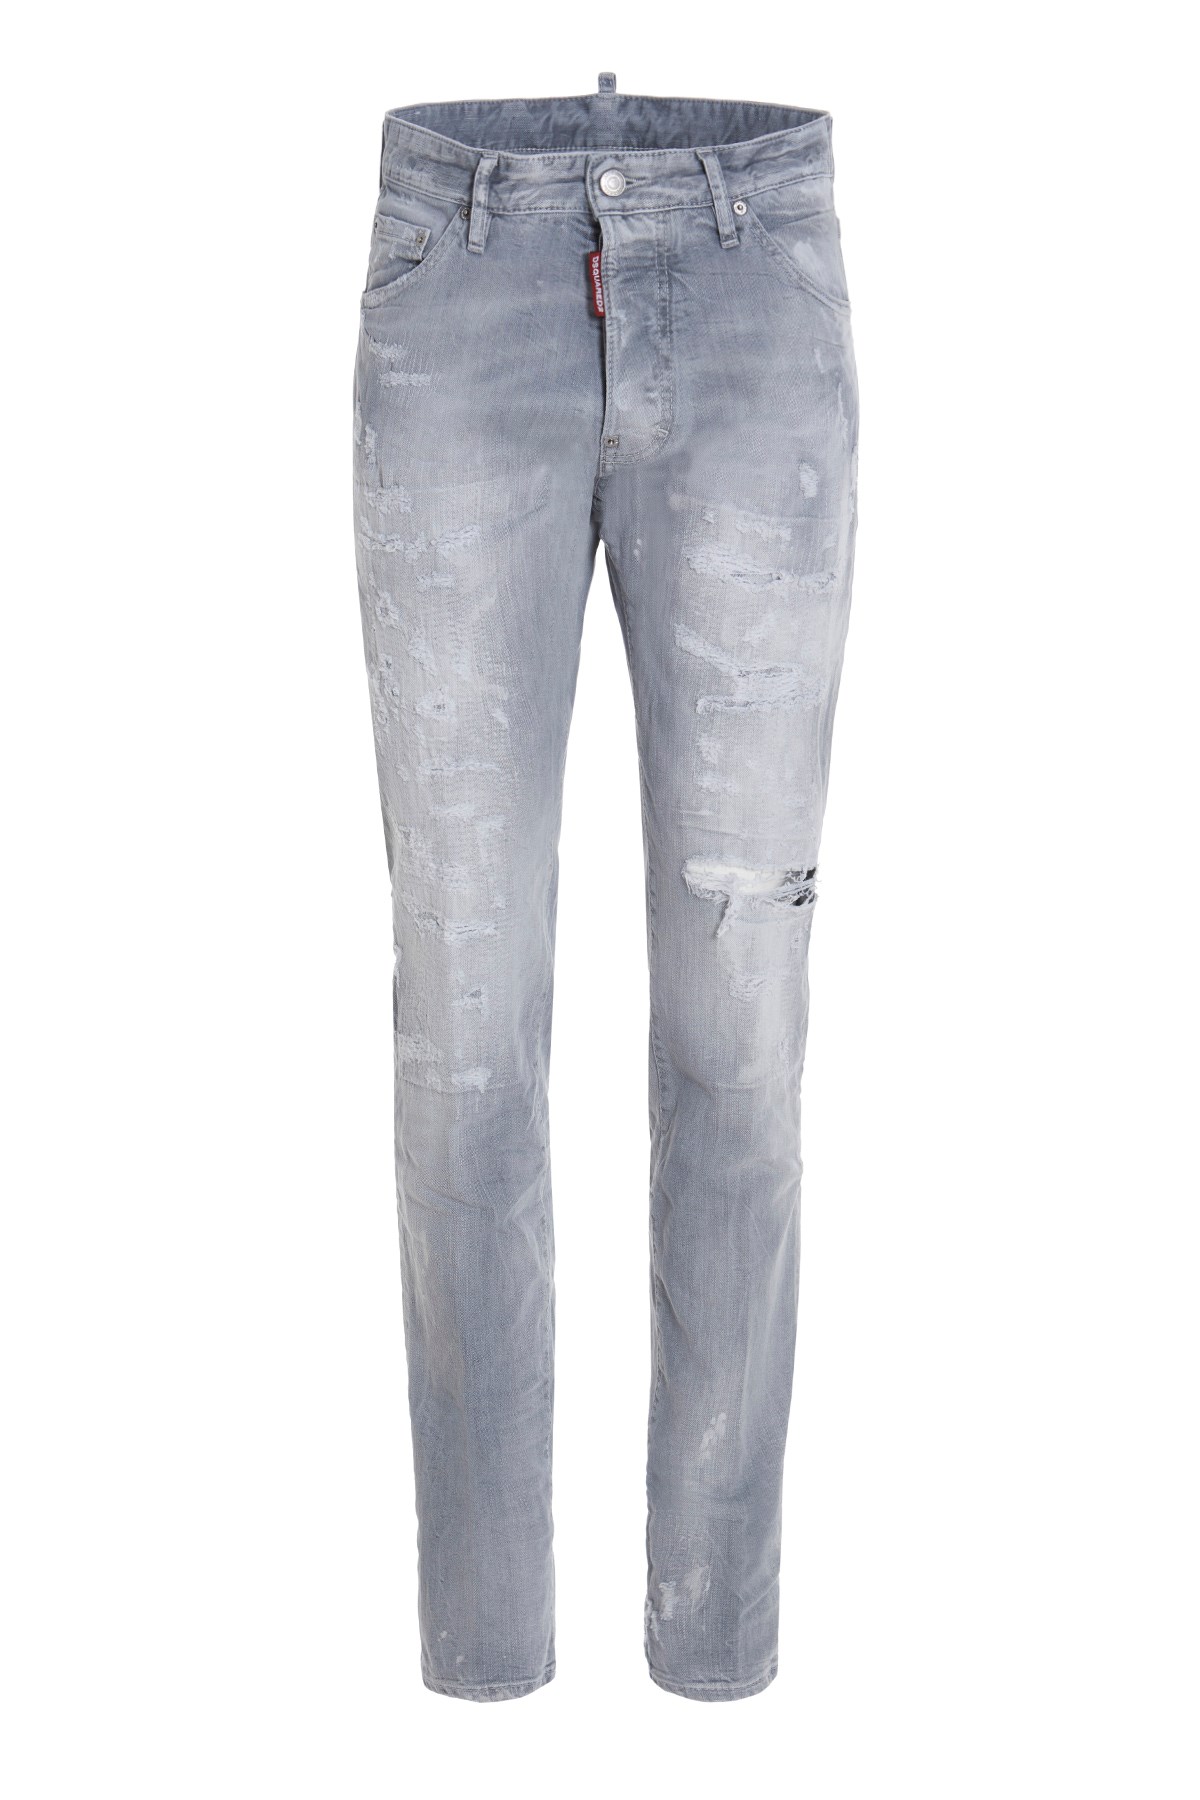 DSQUARED2 'Cool Guy’ Jeans